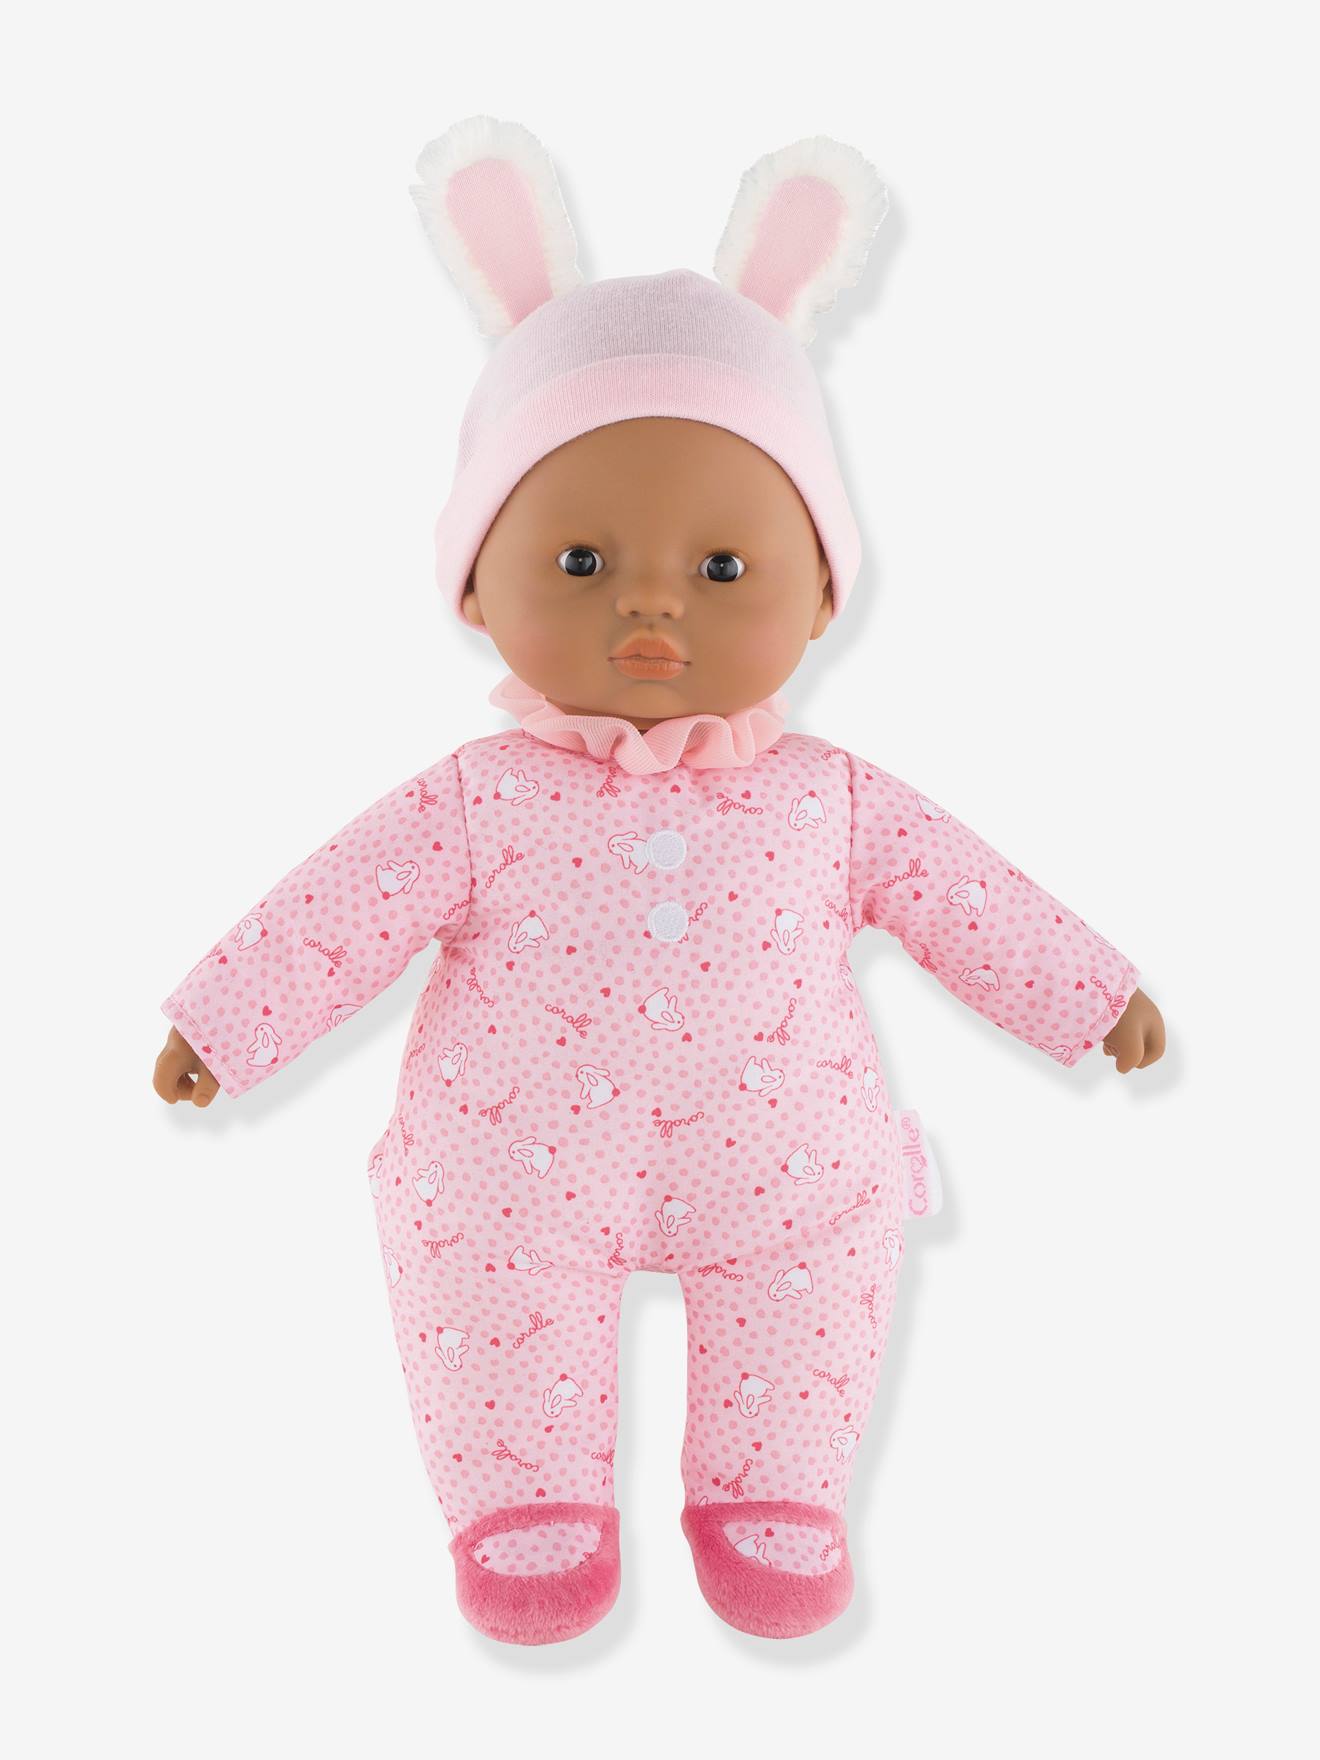 baby doll accessories uk